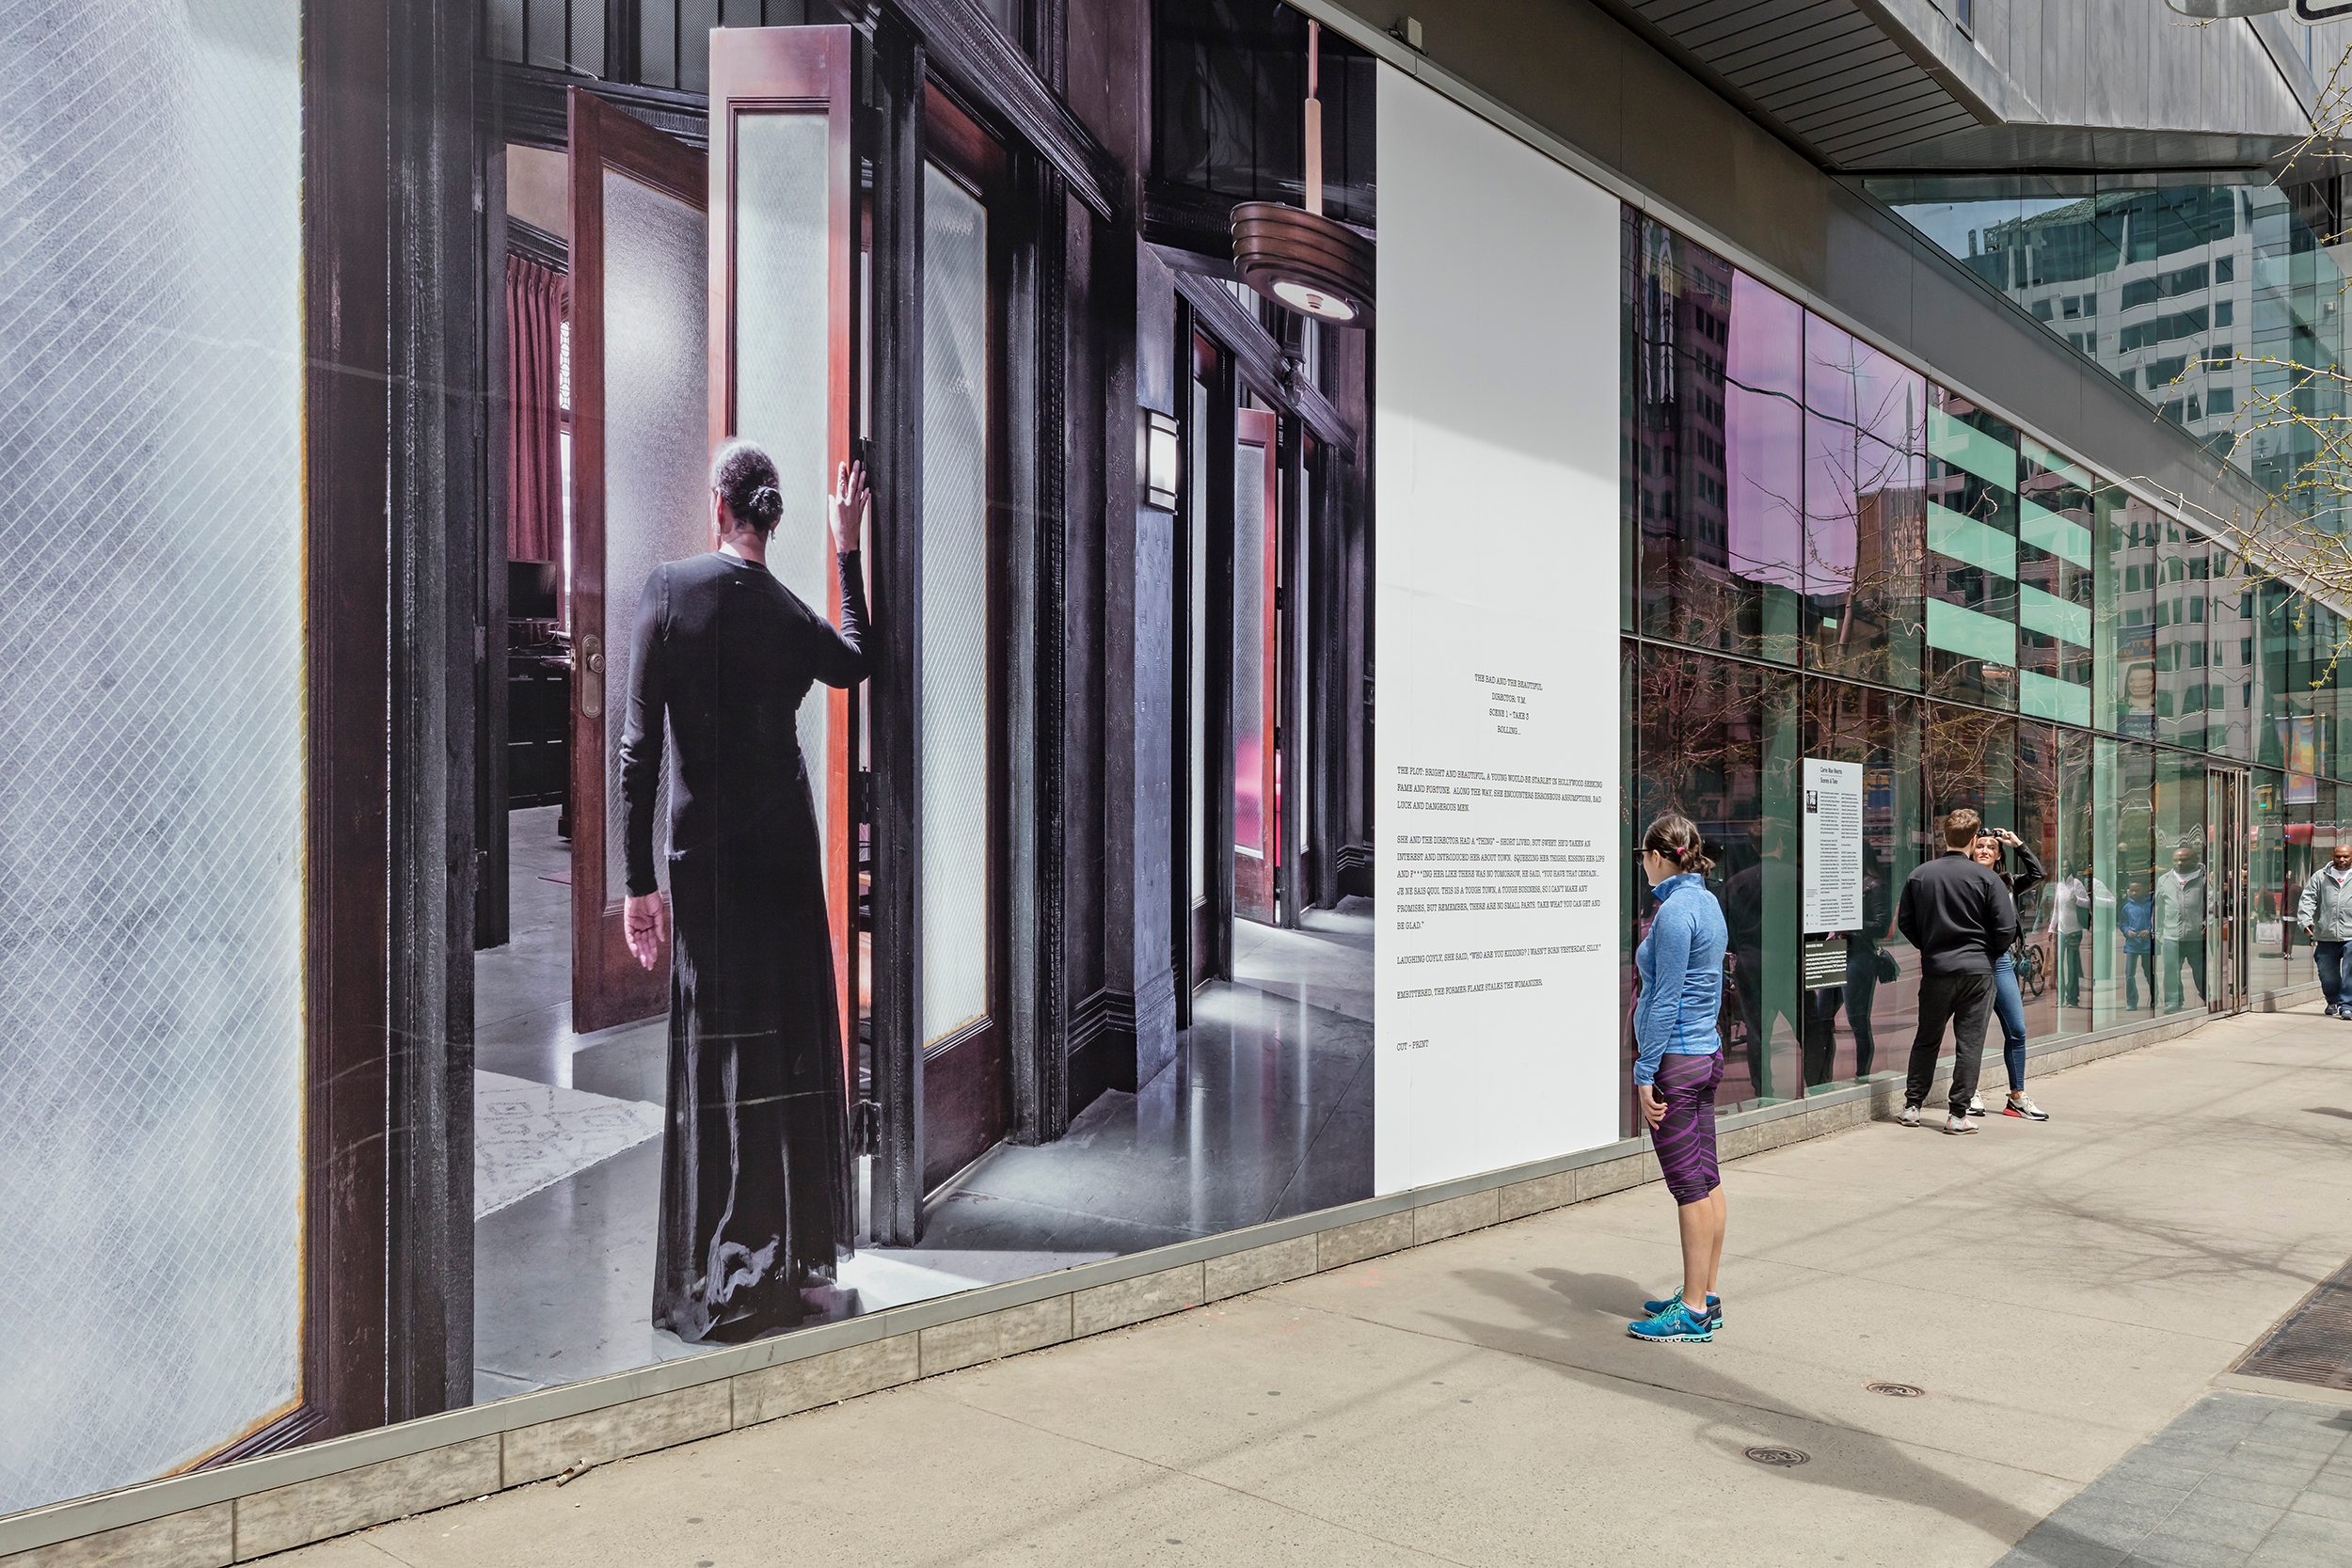     Carrie Mae Weems, Scenes &#038; Take (Director&#8217;s Cut and The Bad and the Beautiful), 2016., Public Installation at TIFF Bell Lightbox, windows at King St. W. and Widmer St., Toronto, May
1–31, 2019. Photo: Toni Hafkenscheid. © Scotiabank CONTACT Photography Festival.
Courtesy the artist and Jack Shainman Gallery, New York, NY.

